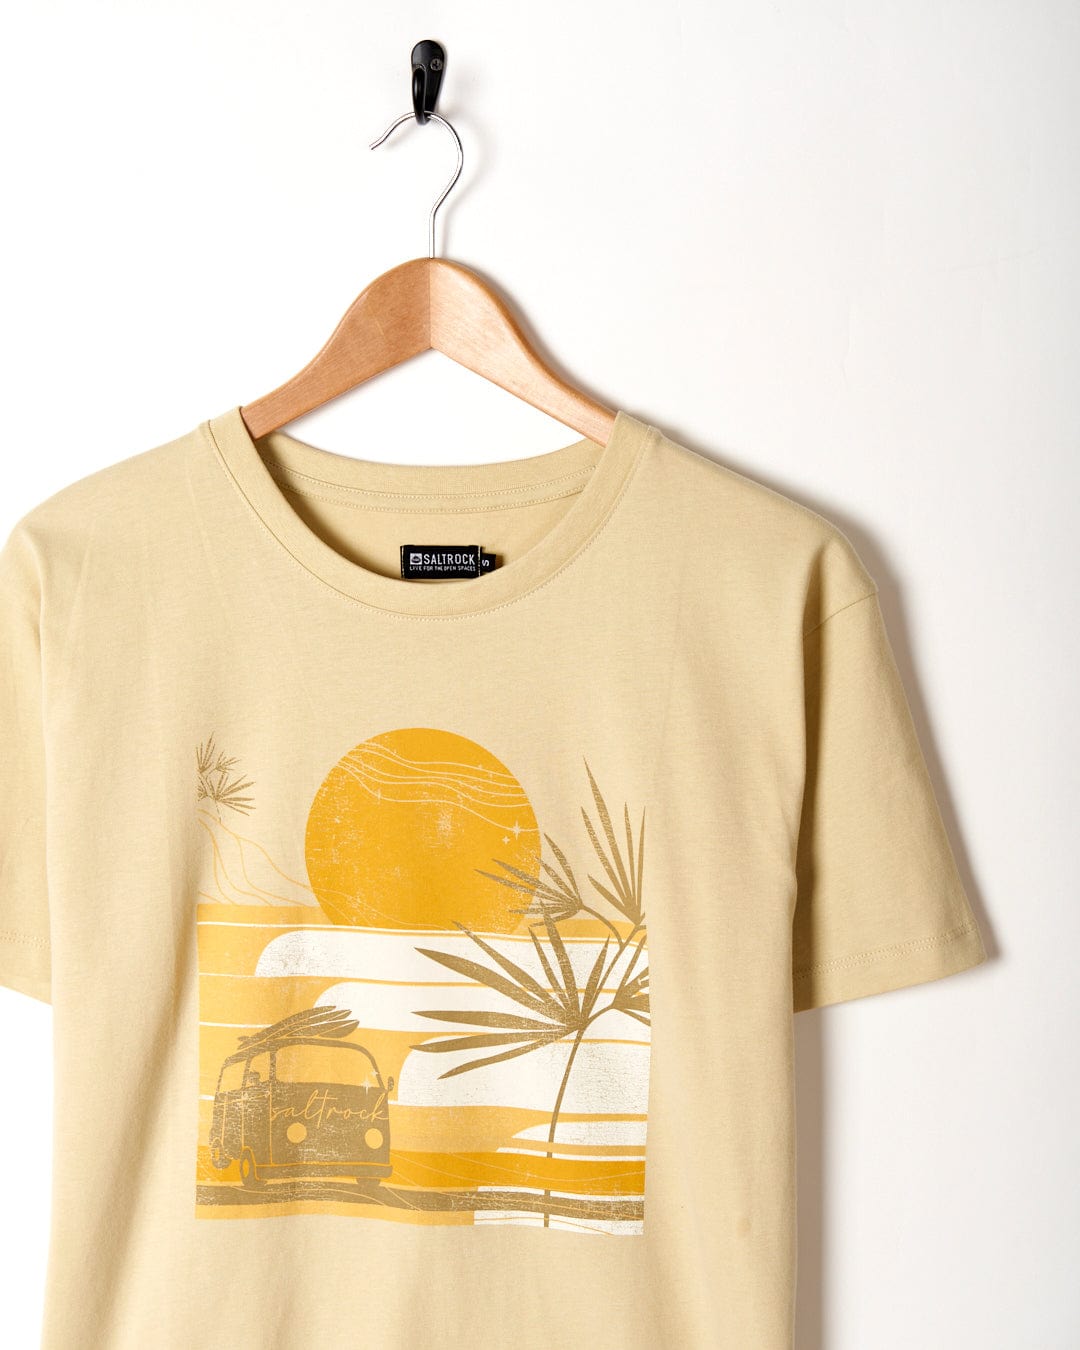 This Saltrock Women's Short Sleeve T-Shirt in Yellow features a stunning sunset scene with a palm tree.